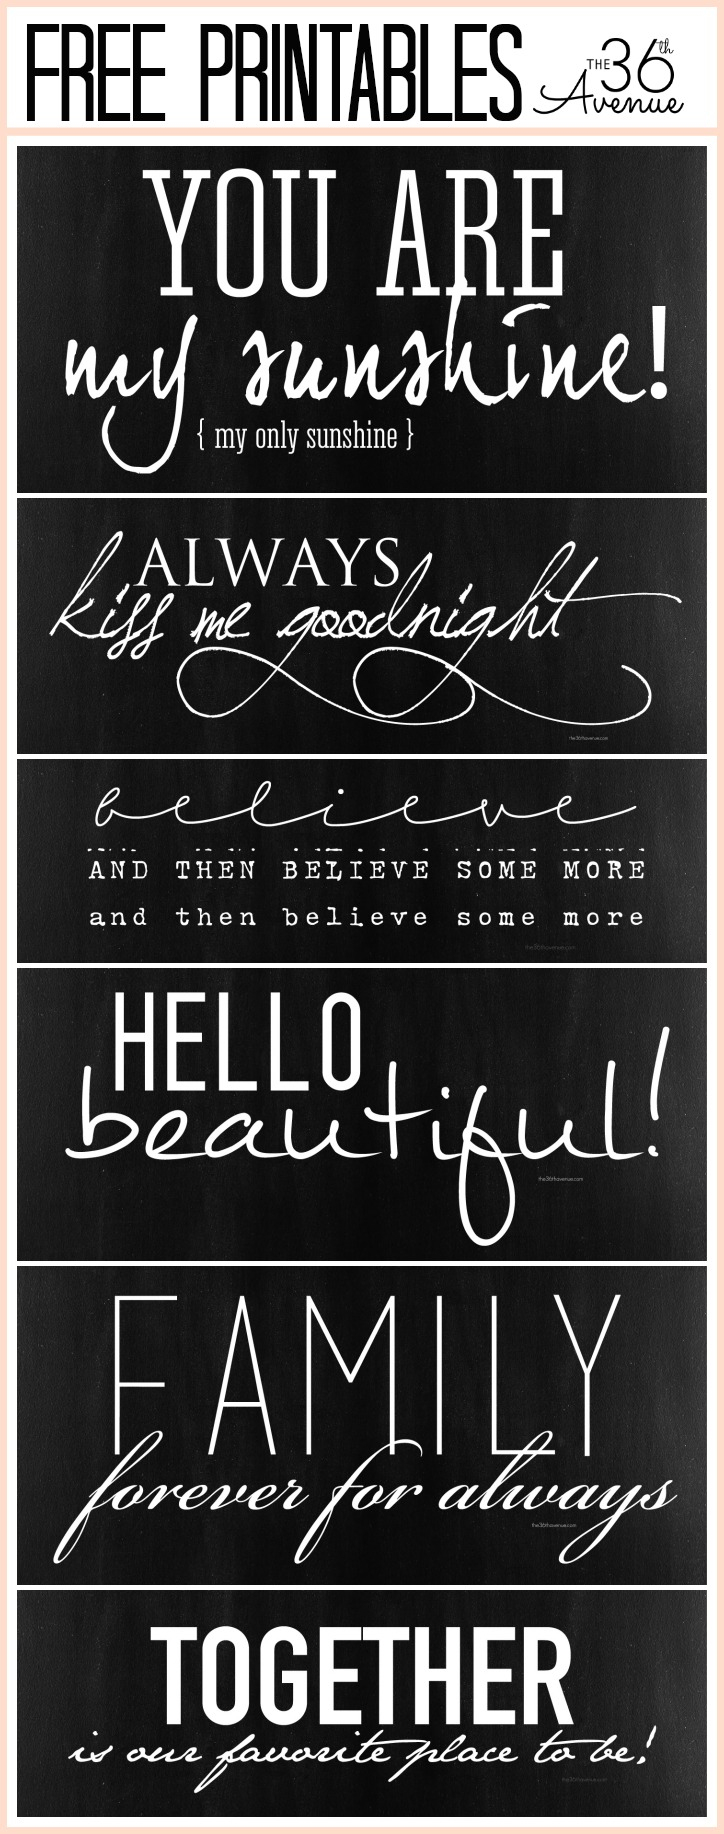 Free Fonts And Printable Combinations - The 36Th Avenue - Free Printable Fonts